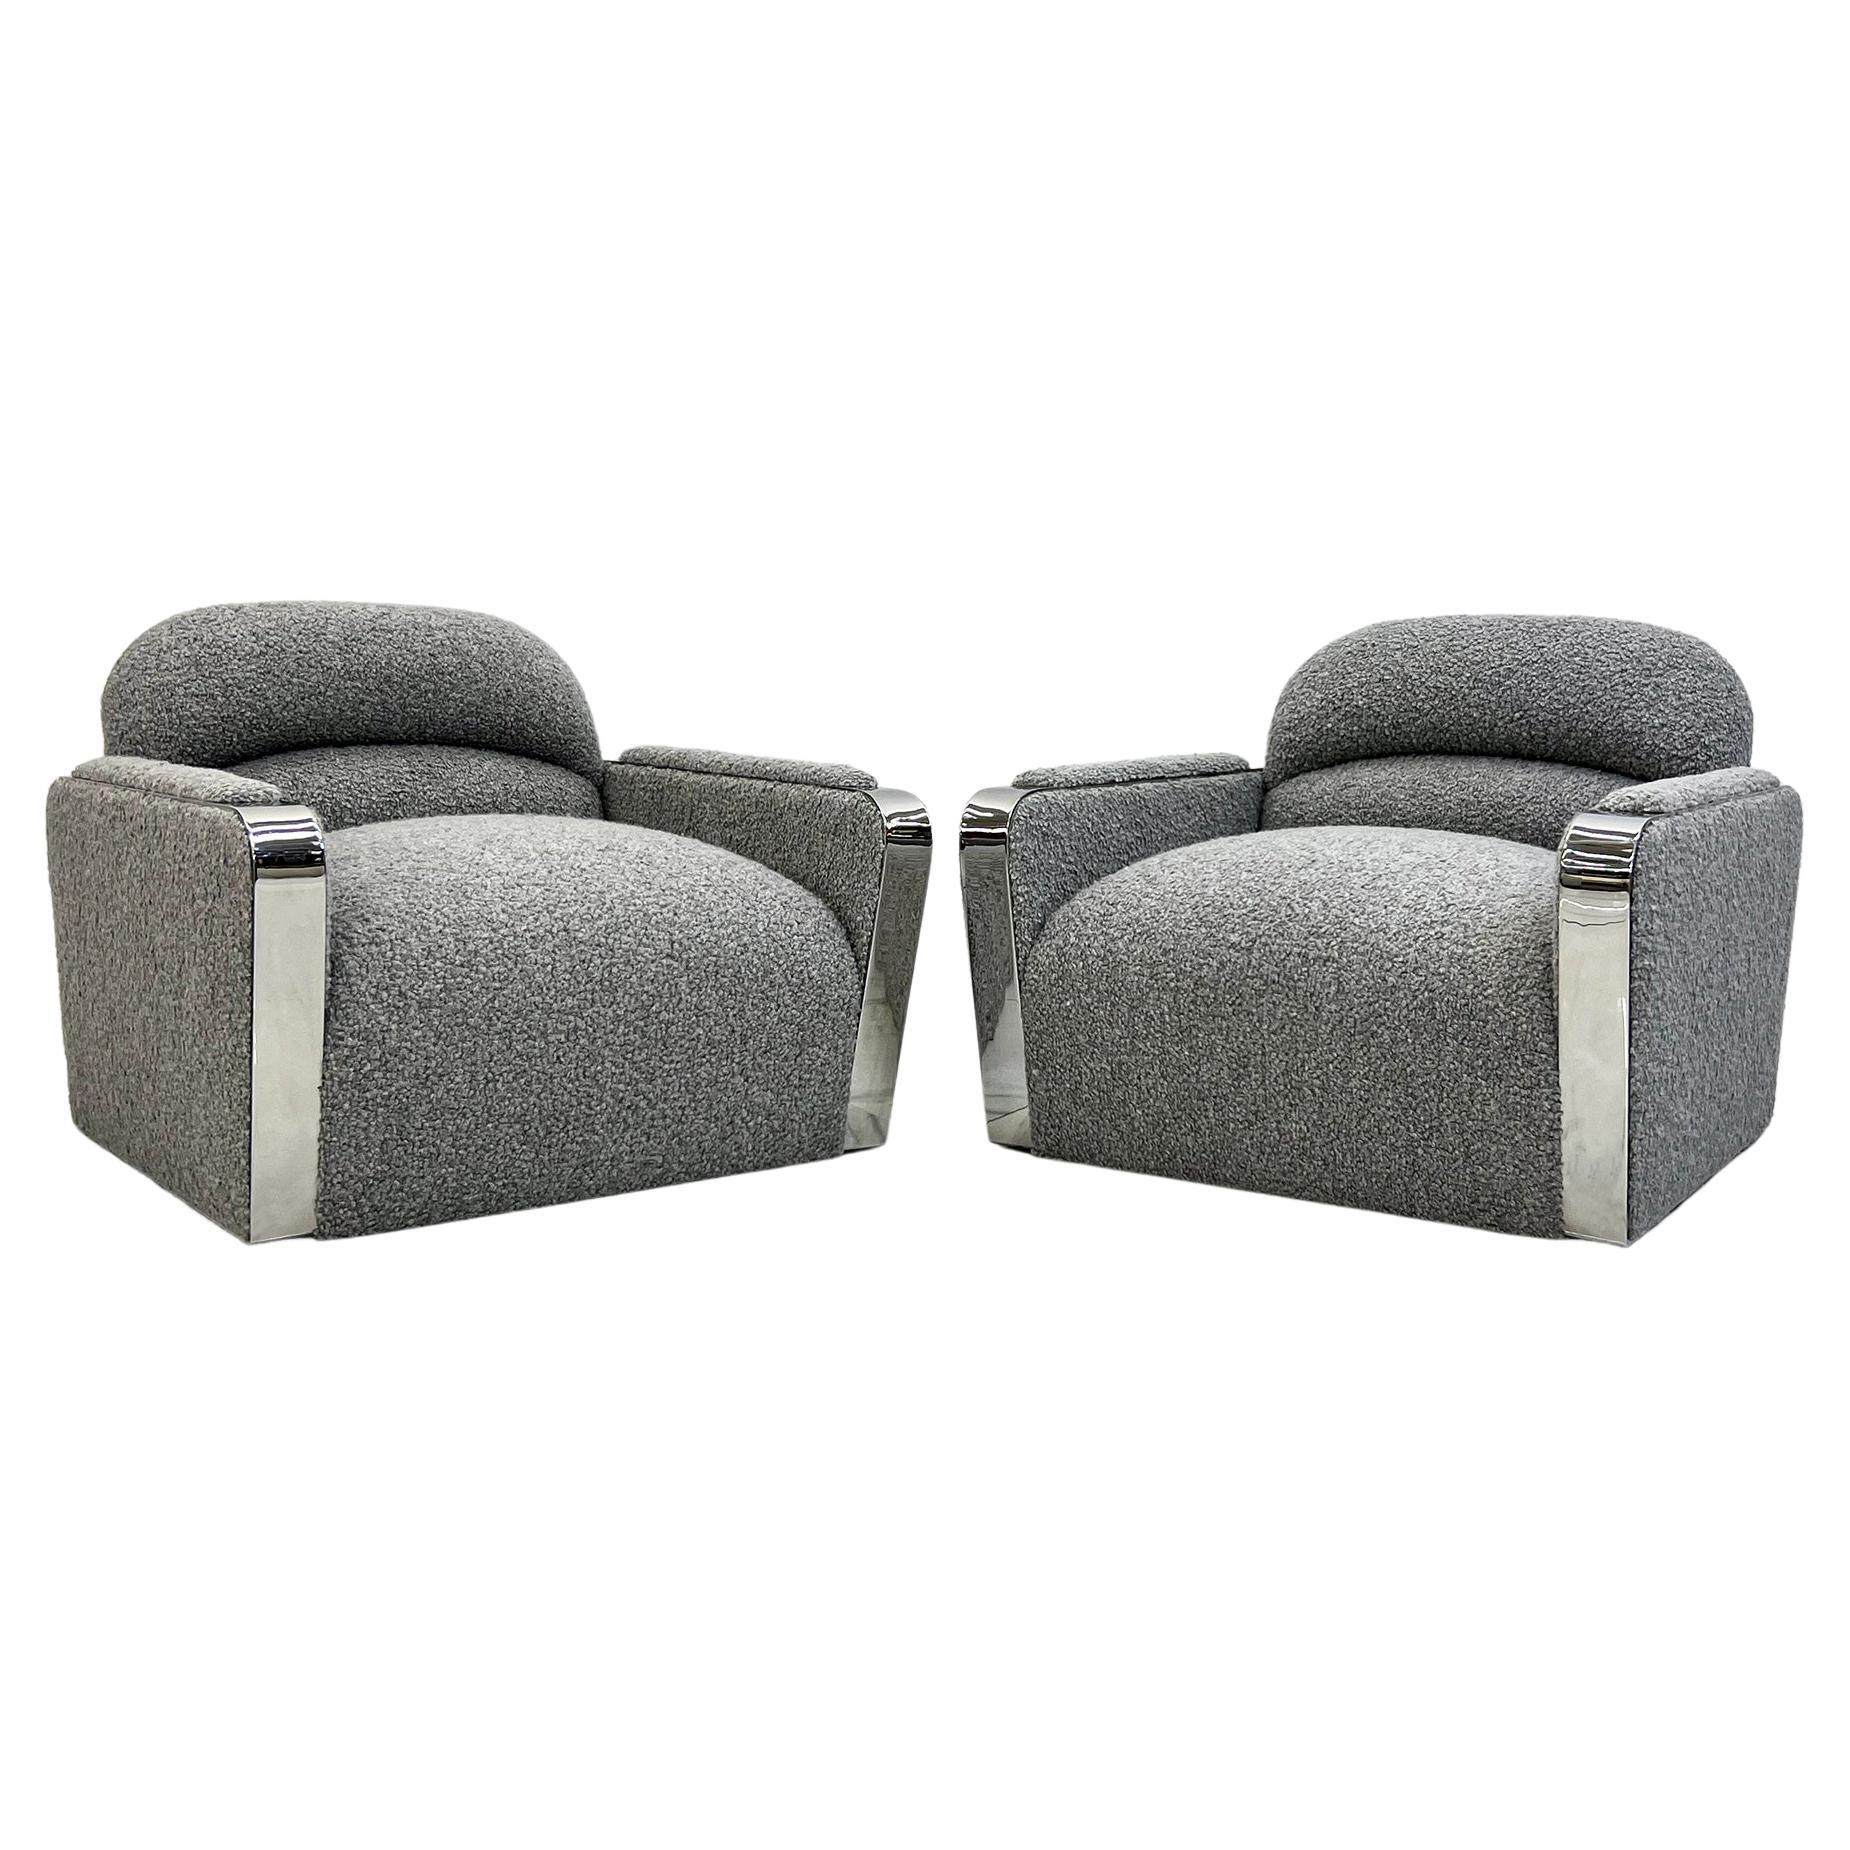 Lounge Chairs by Stanley Jay Friedman for Brueton, Gray Boucle, 1980's, a Pair For Sale